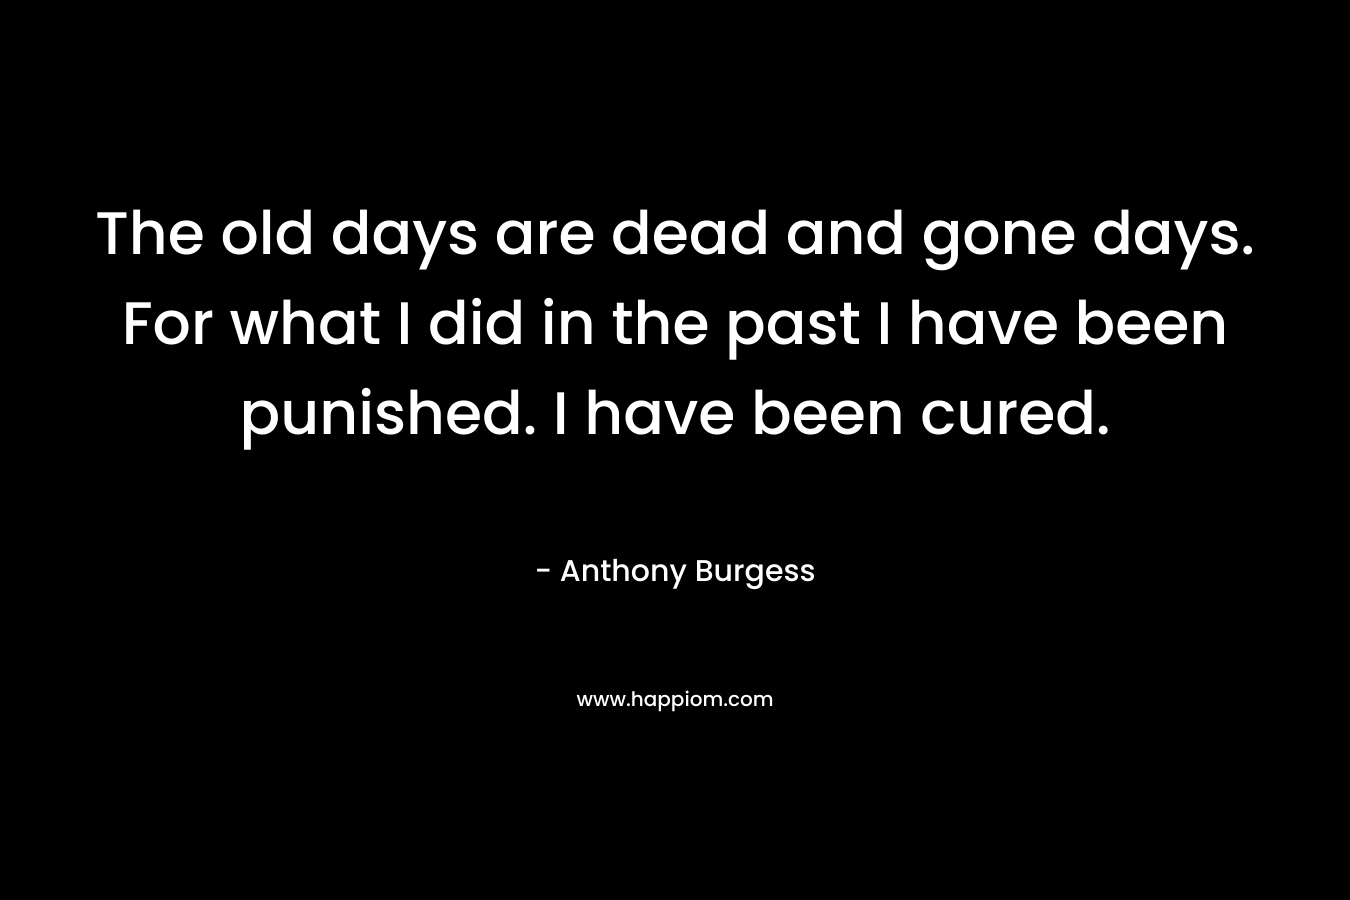 The old days are dead and gone days. For what I did in the past I have been punished. I have been cured. – Anthony Burgess